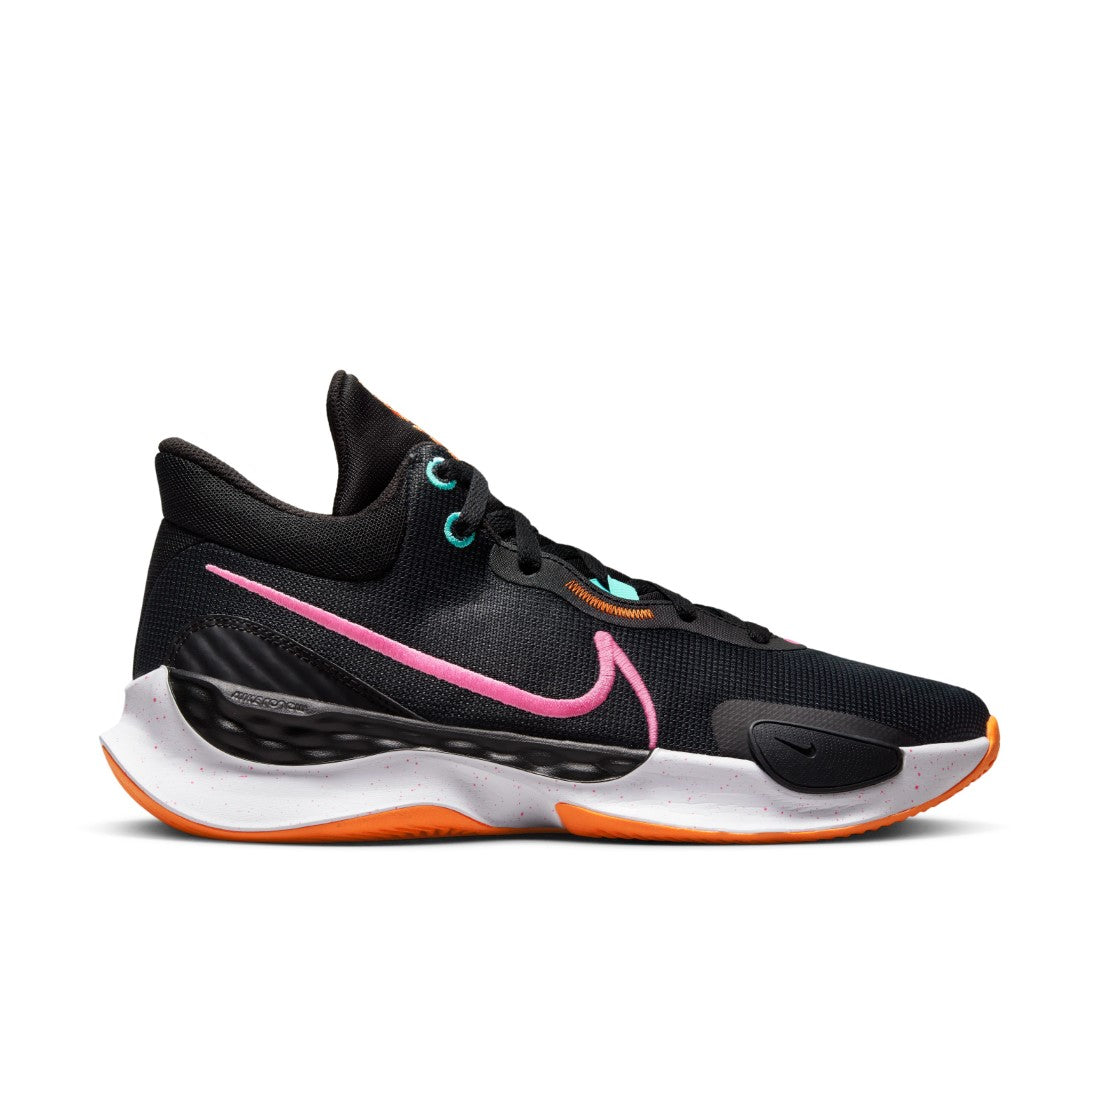 Elevate 3 Basketball Shoes